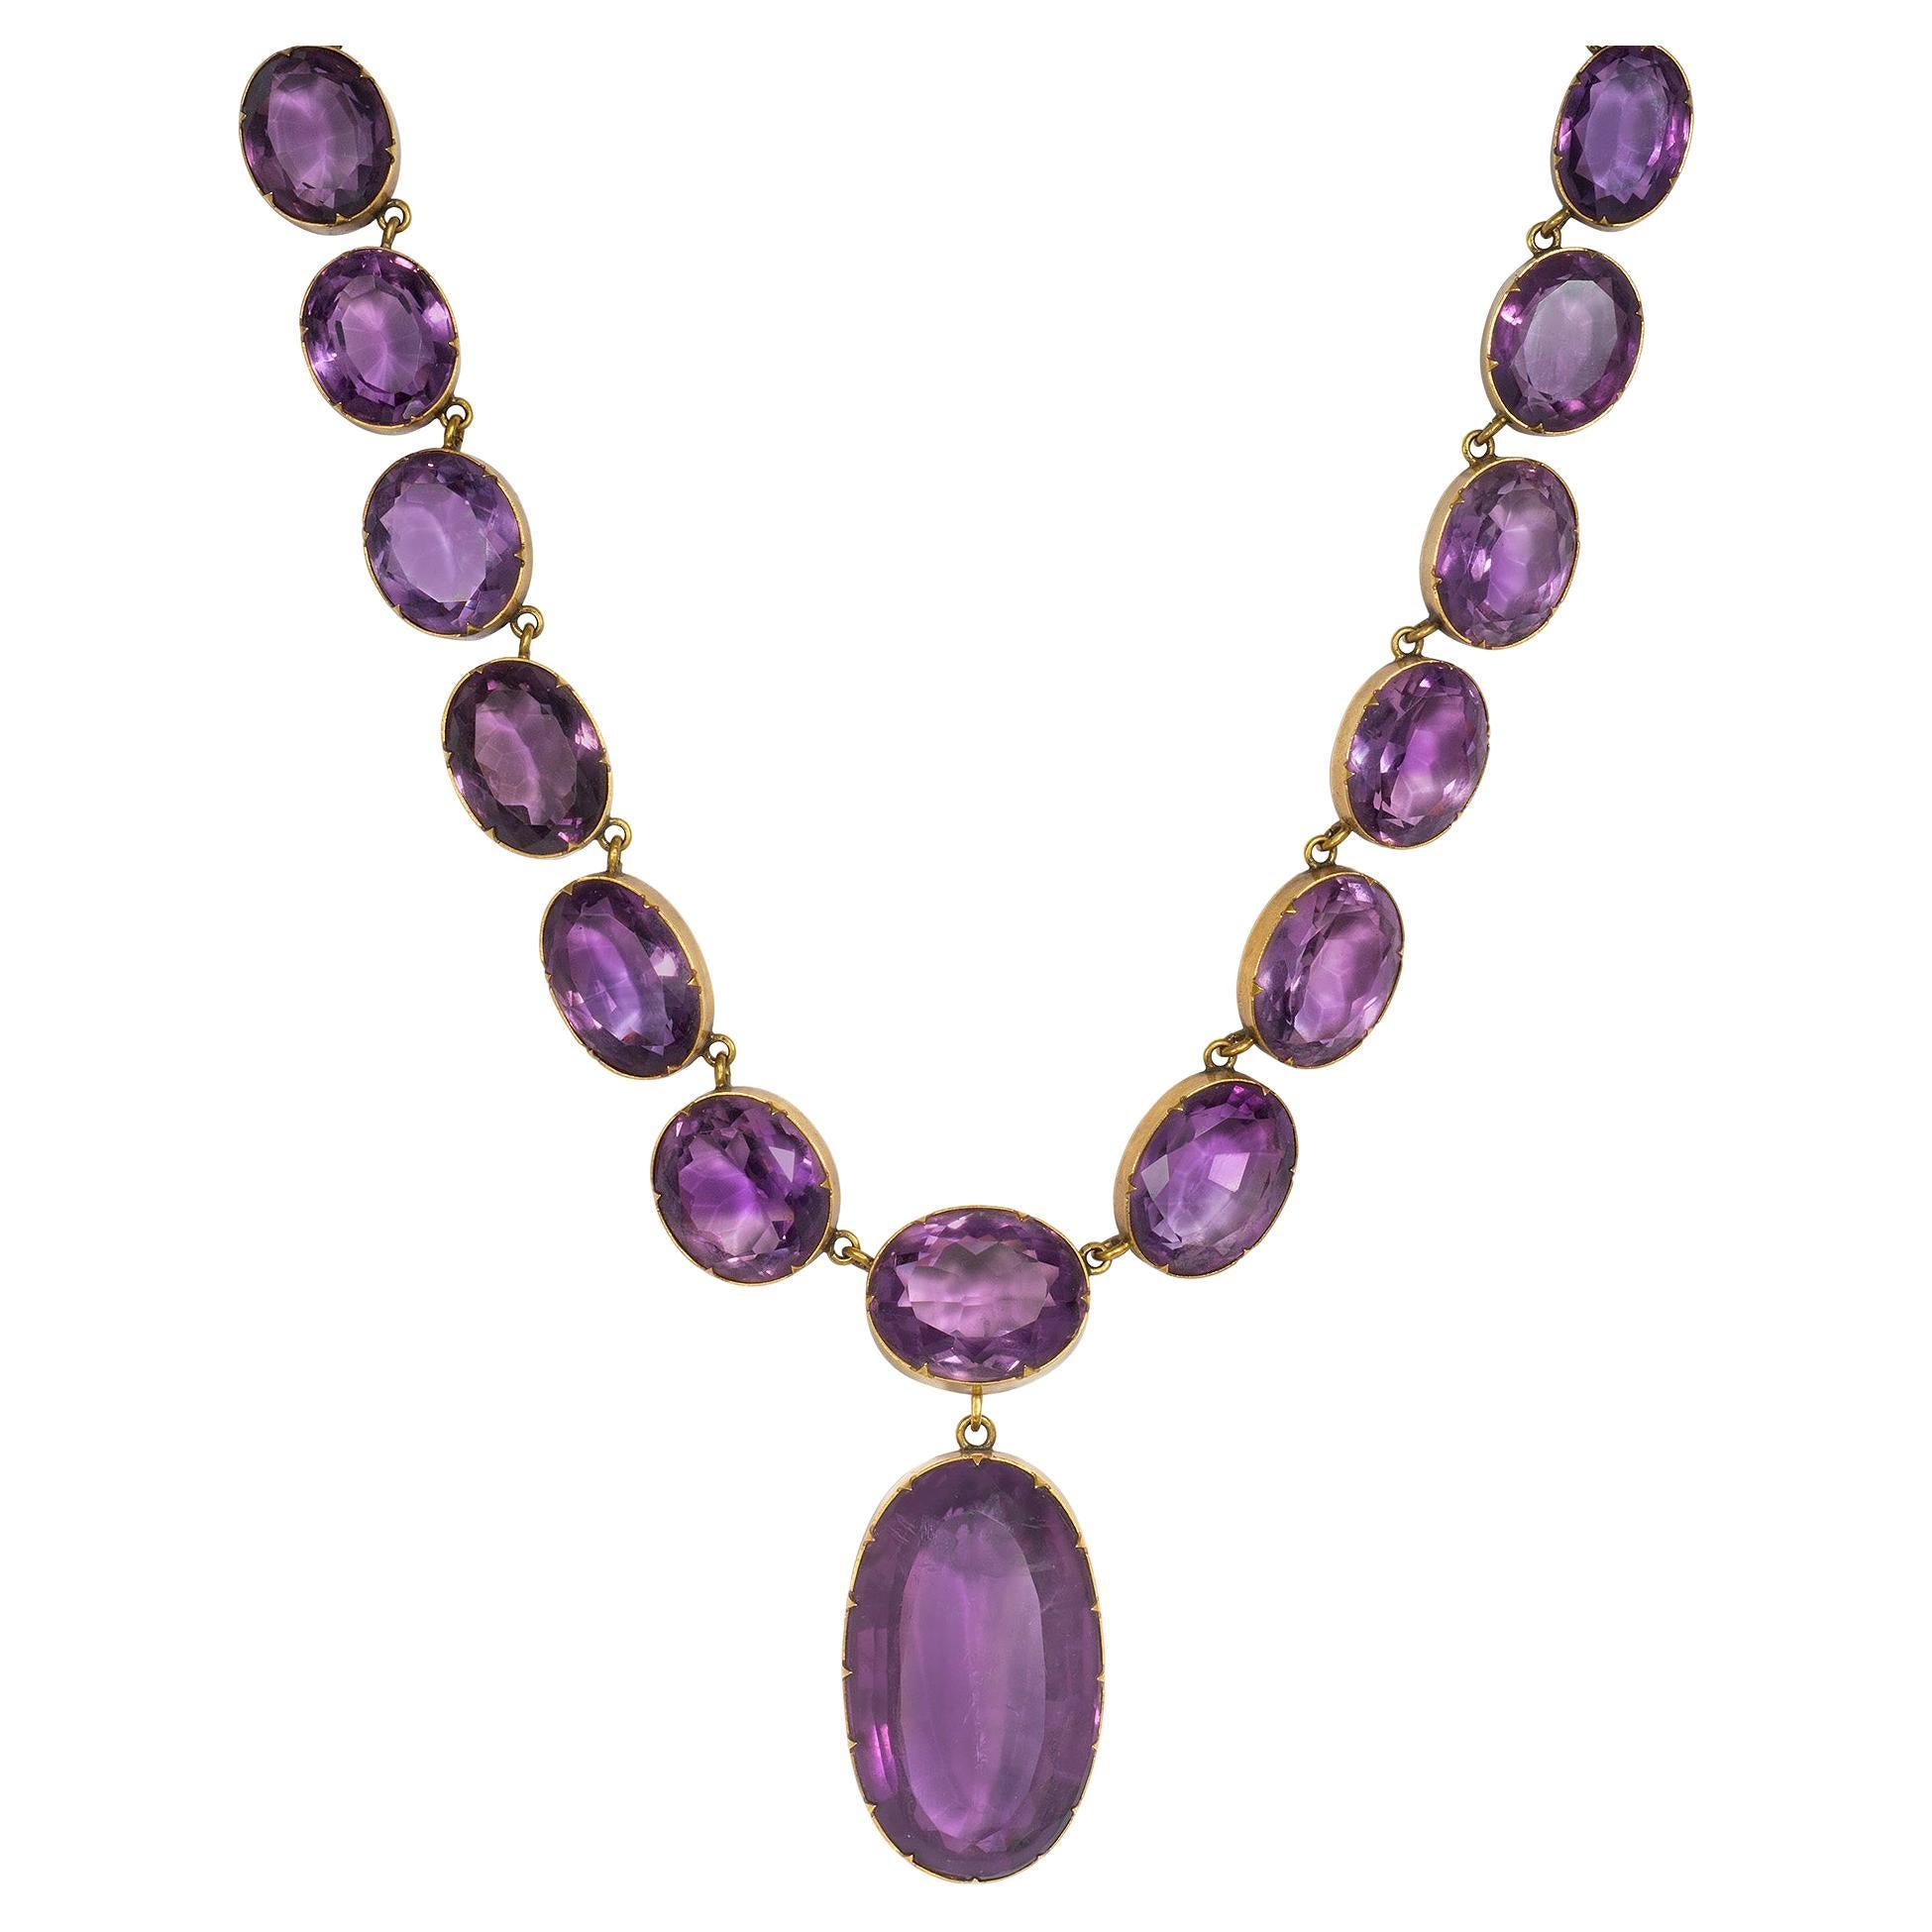 Antique Gold and Amethyst Rivière-Style Necklace with Detachable Pendant